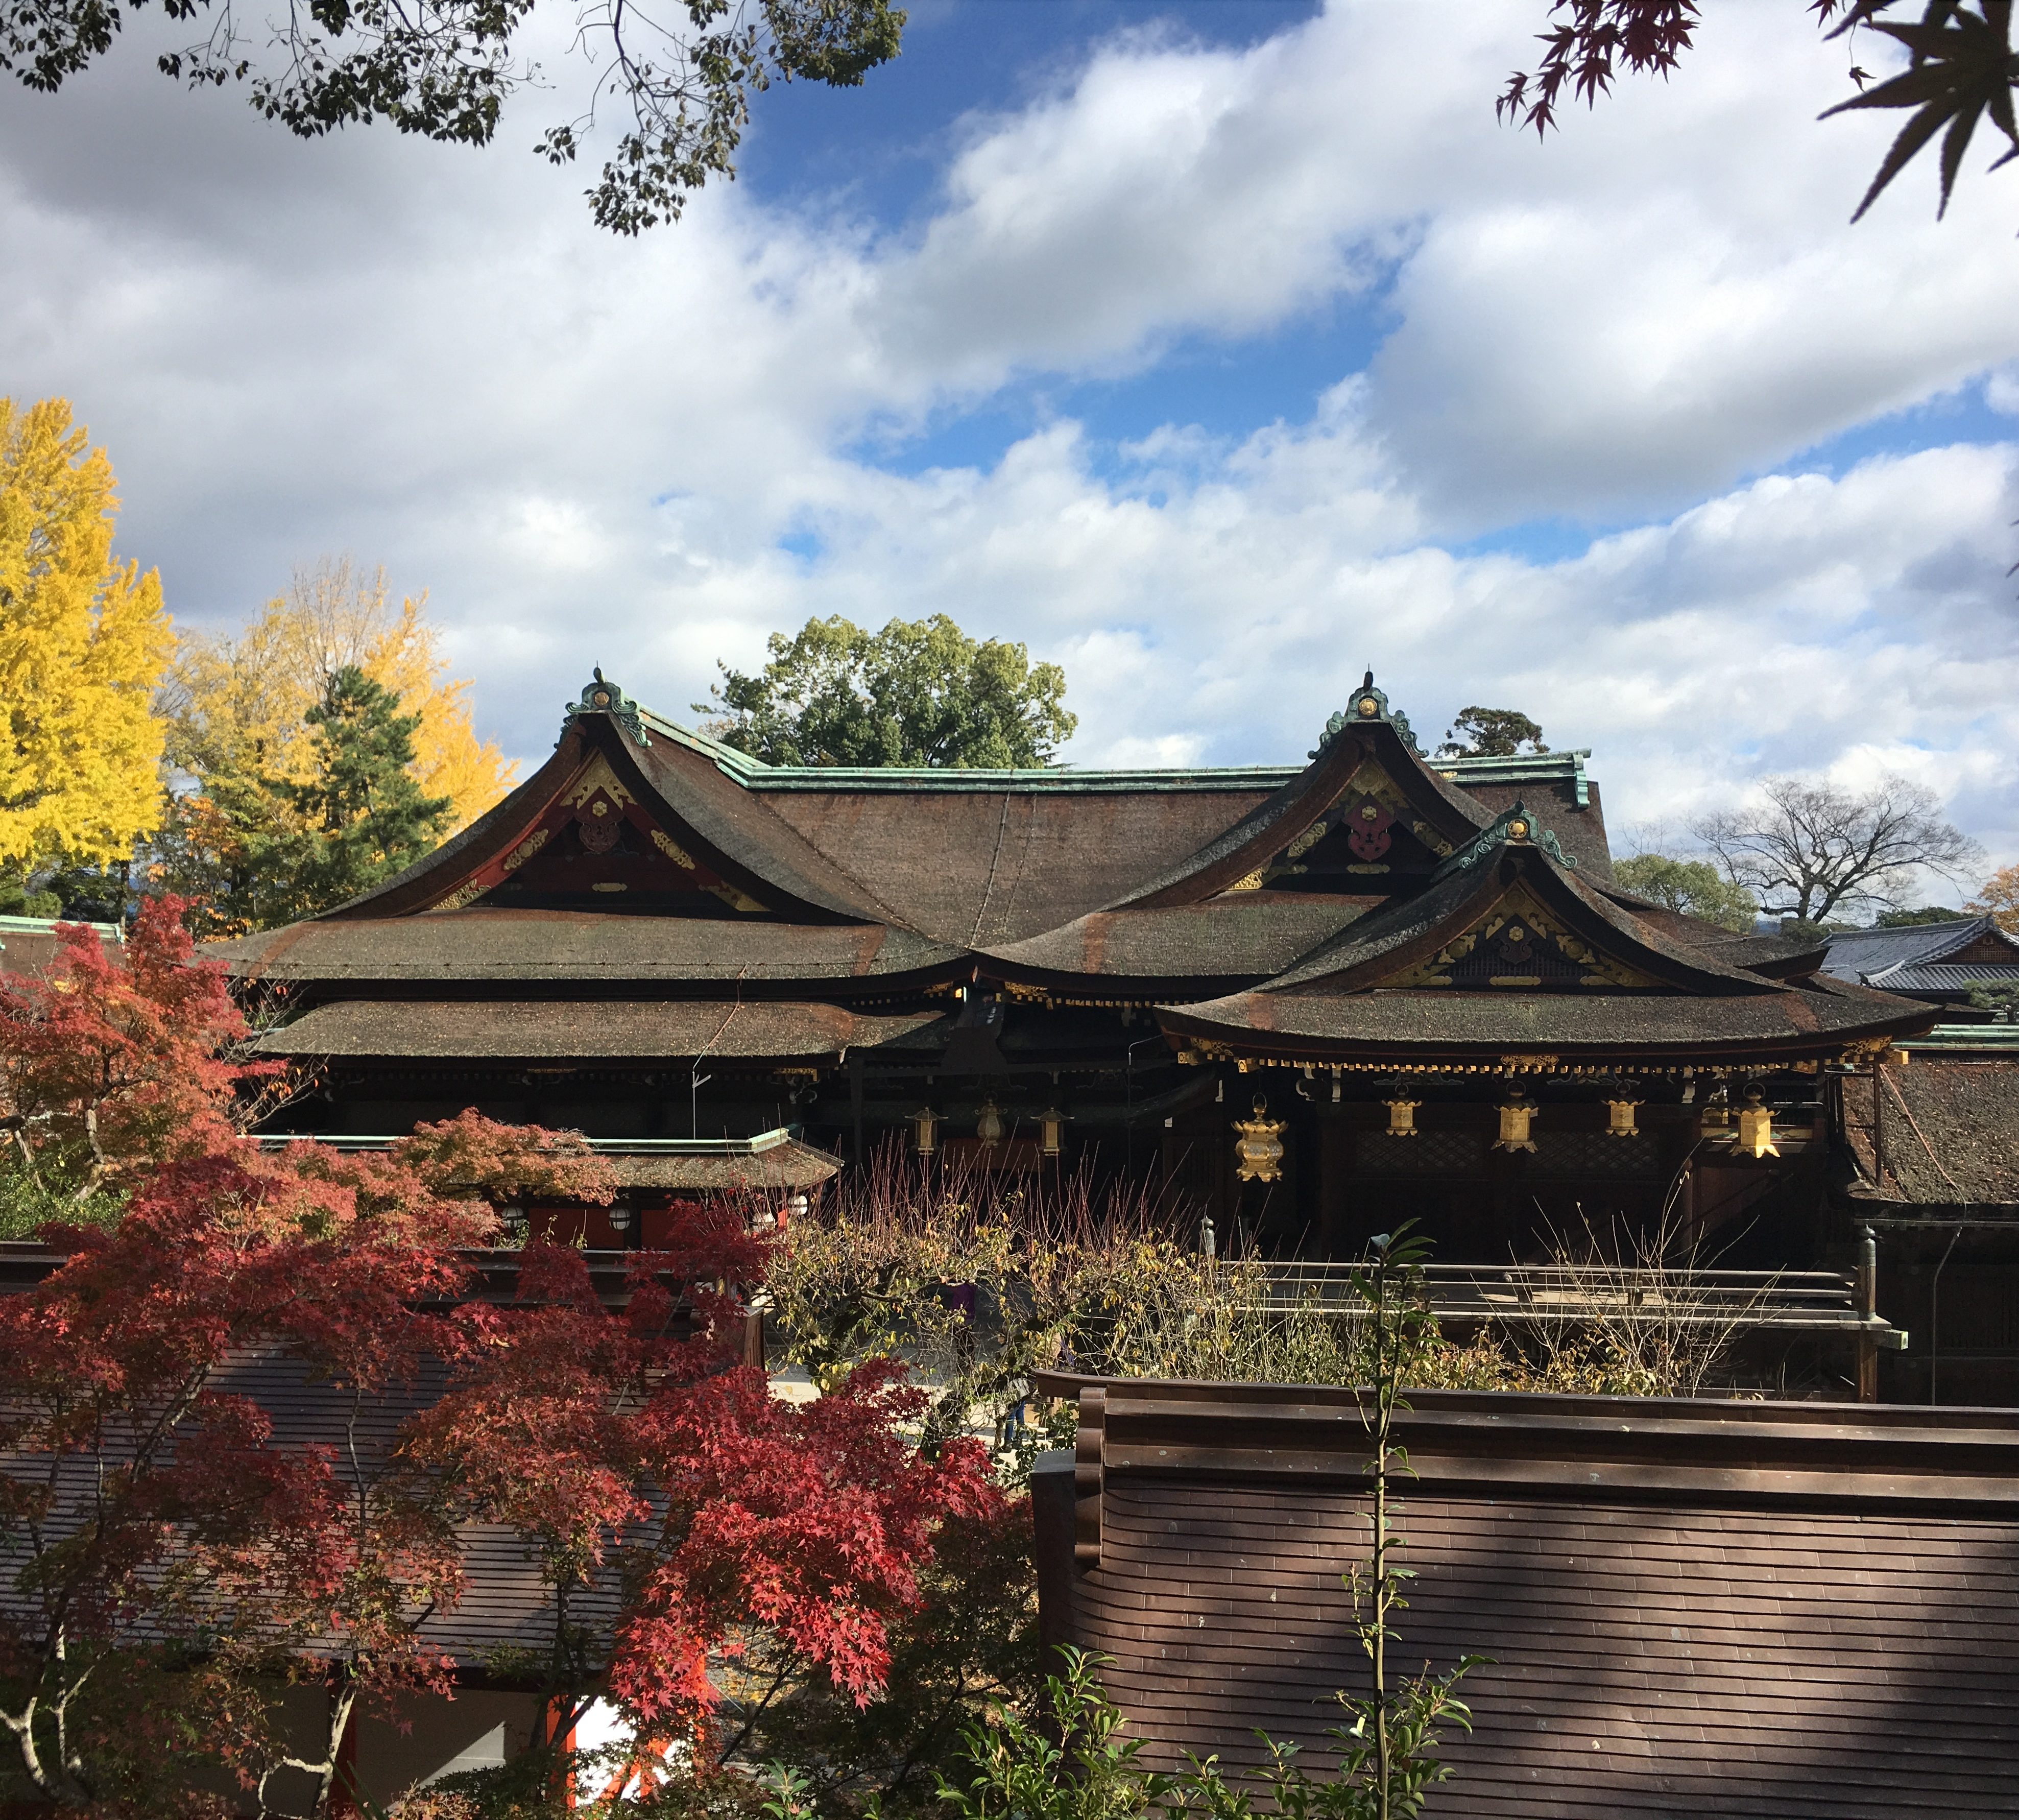 Kitano Tenmangu's honden from a distance surrounded by fall colors